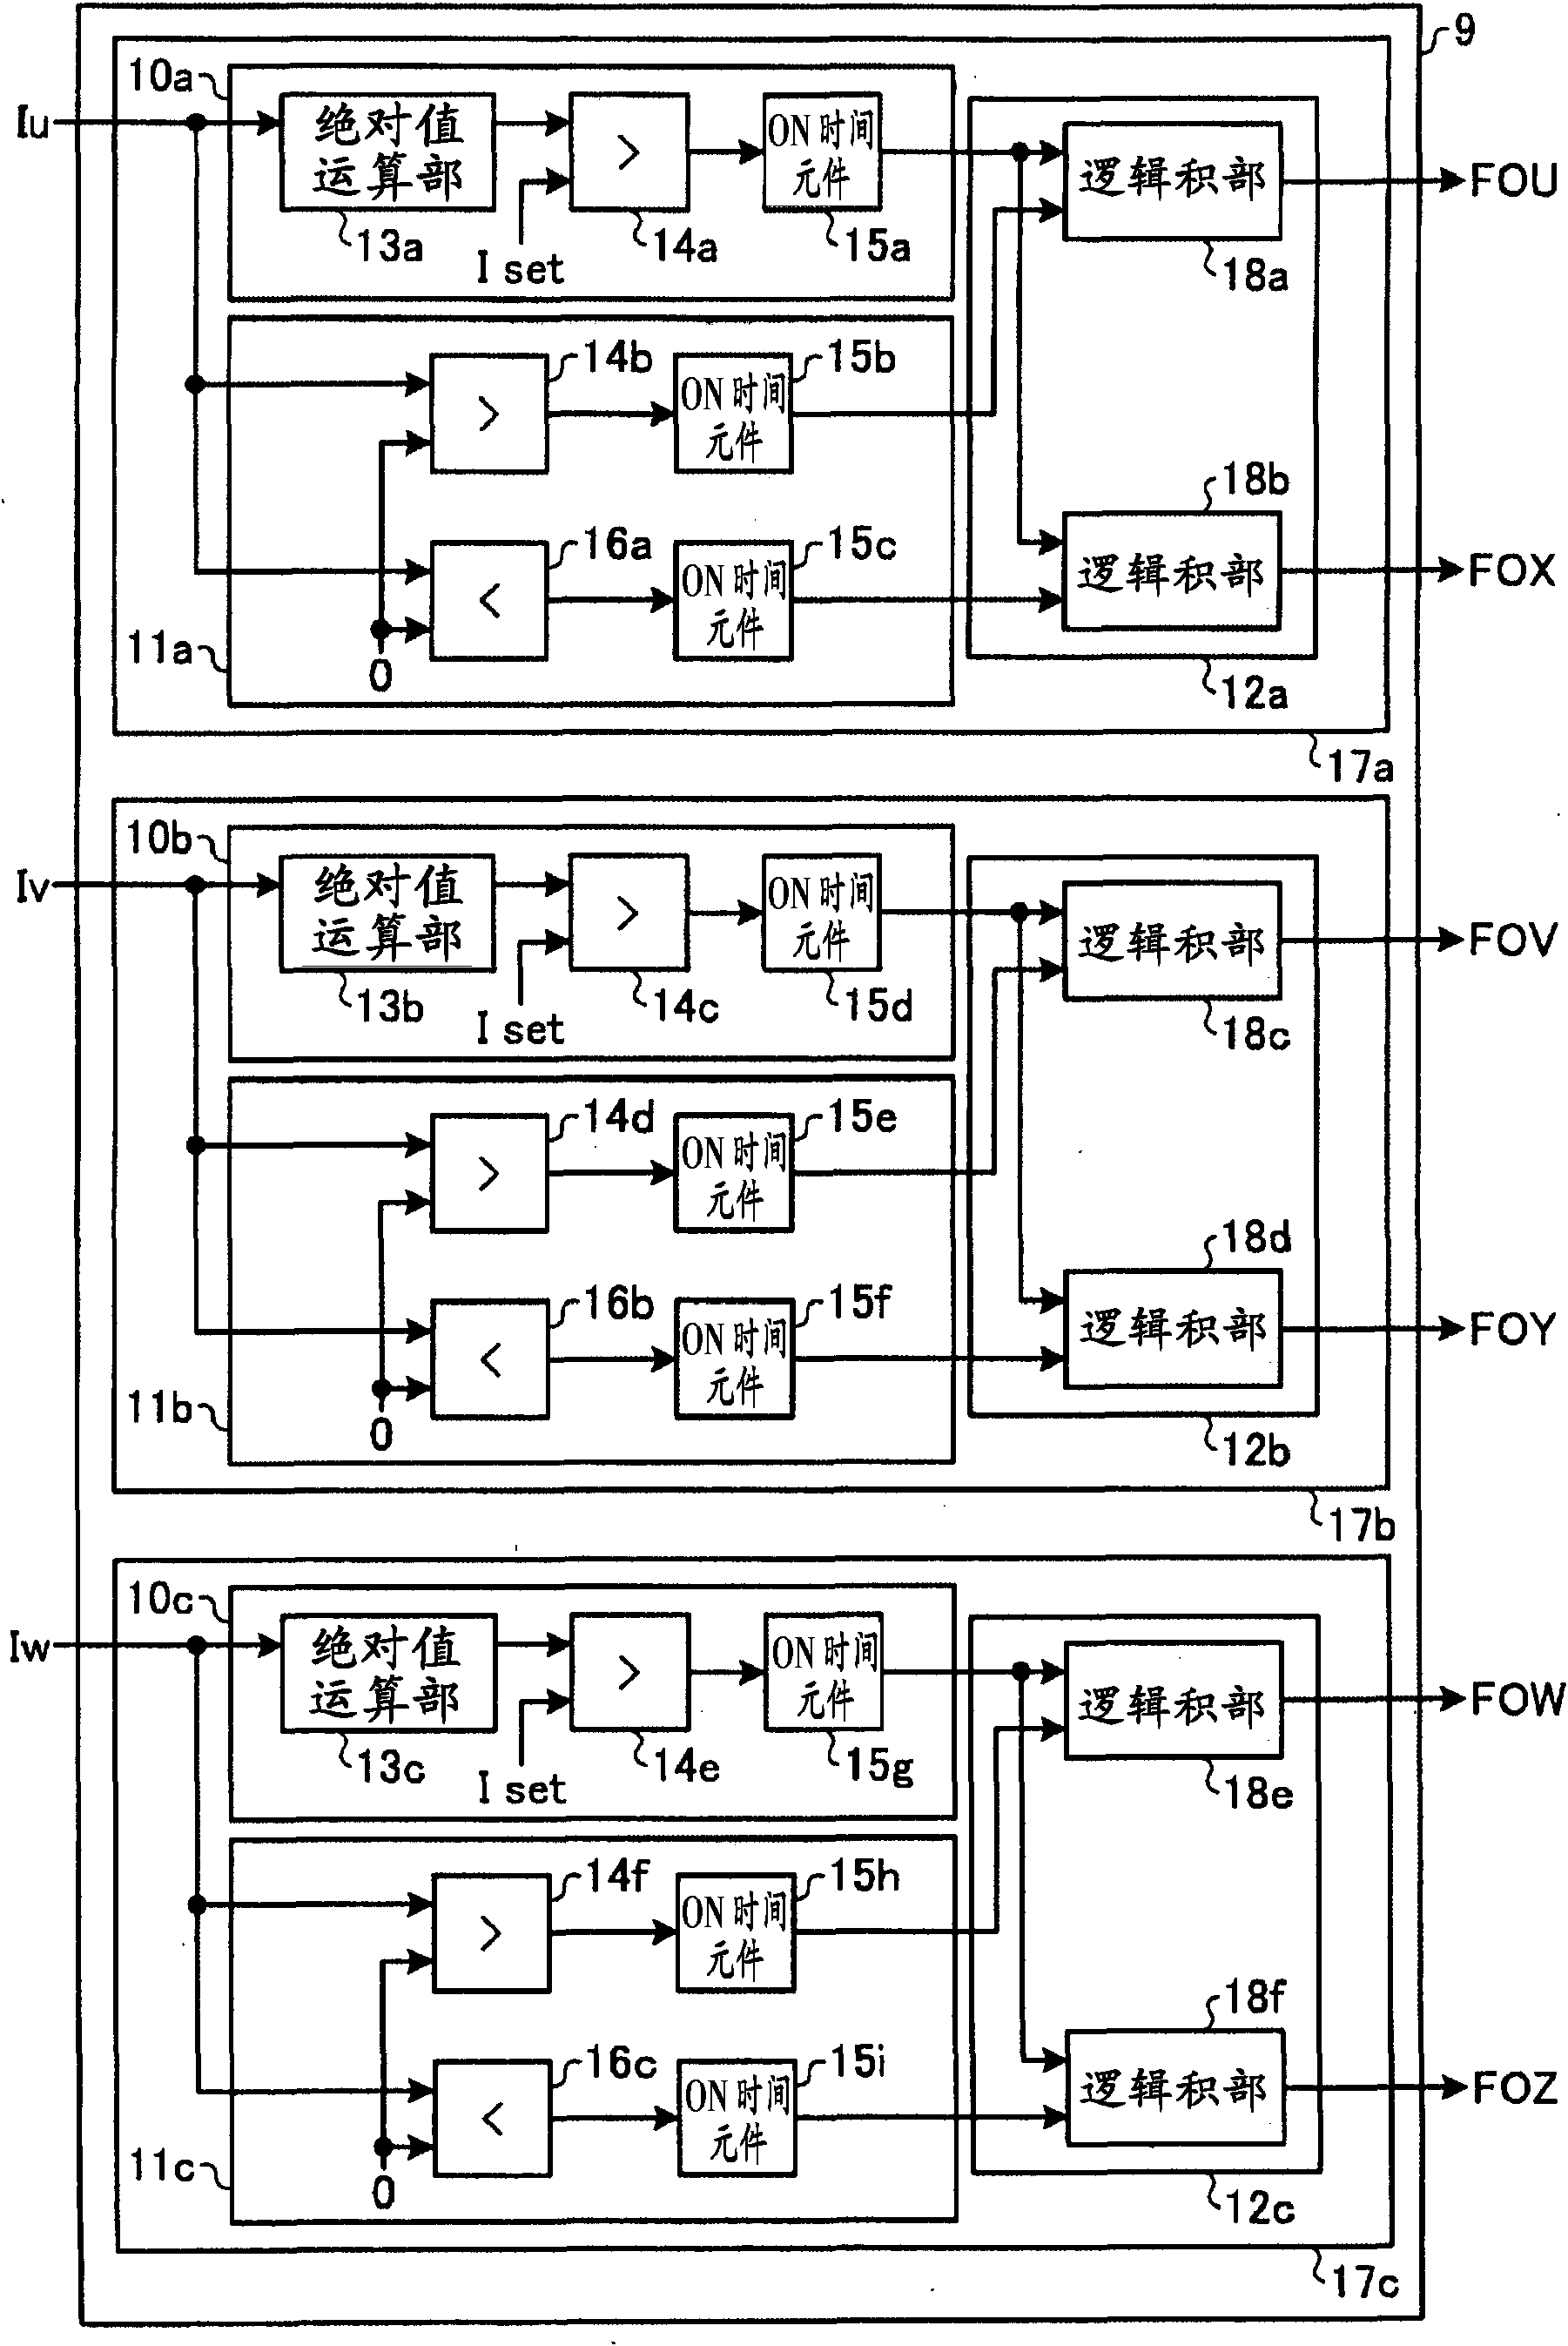 Power converting apparatus for an electric car